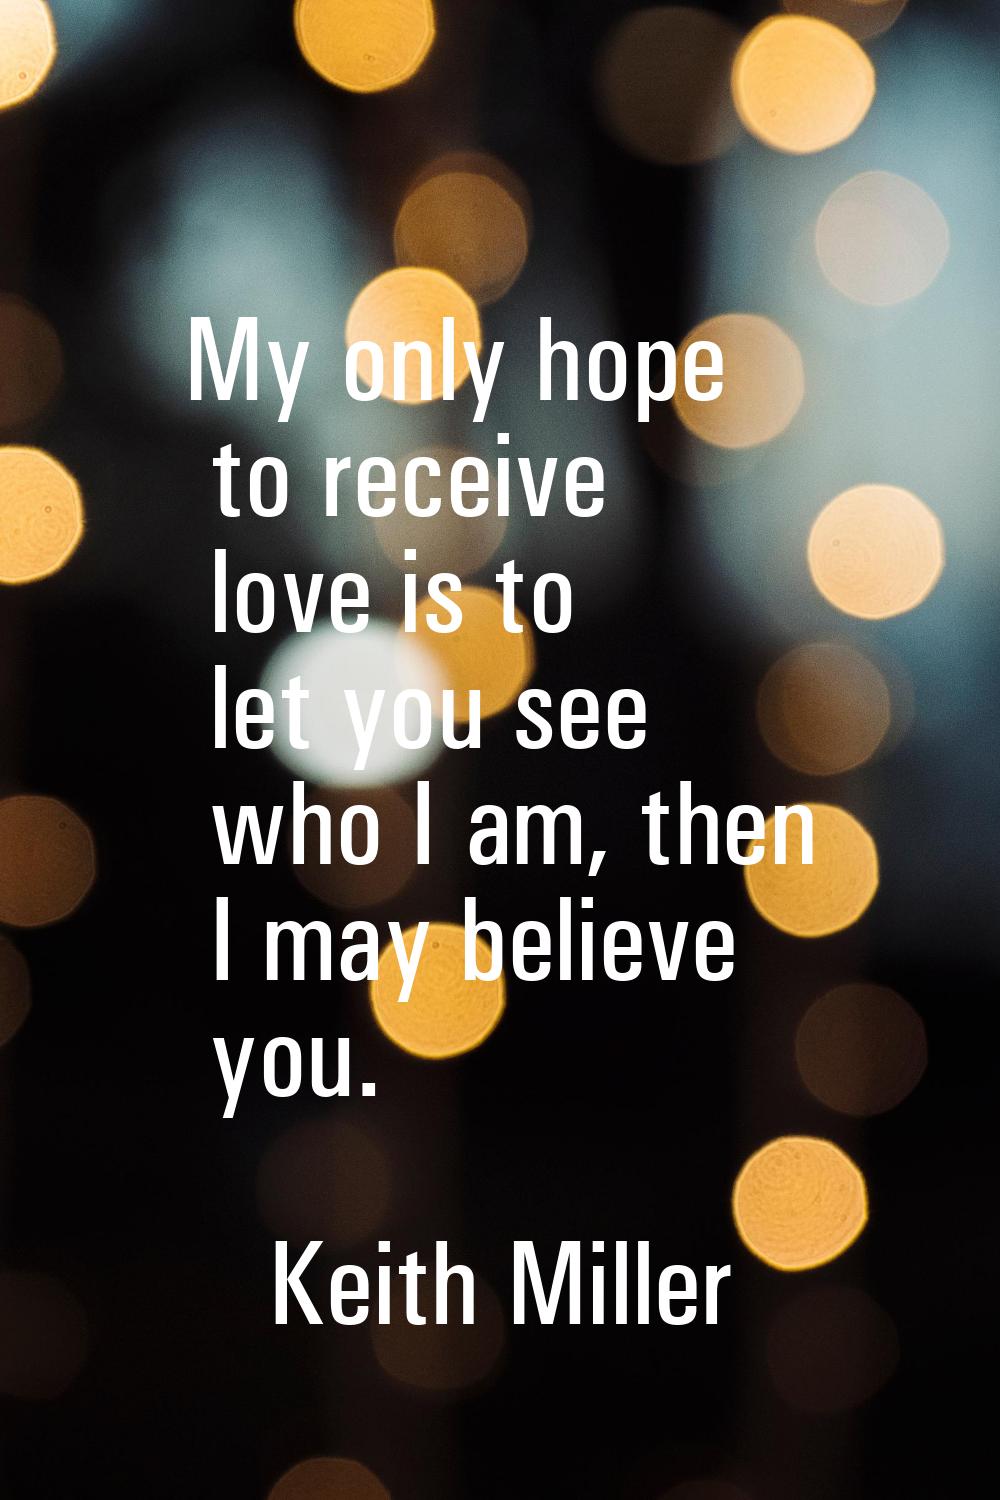 My only hope to receive love is to let you see who I am, then I may believe you.